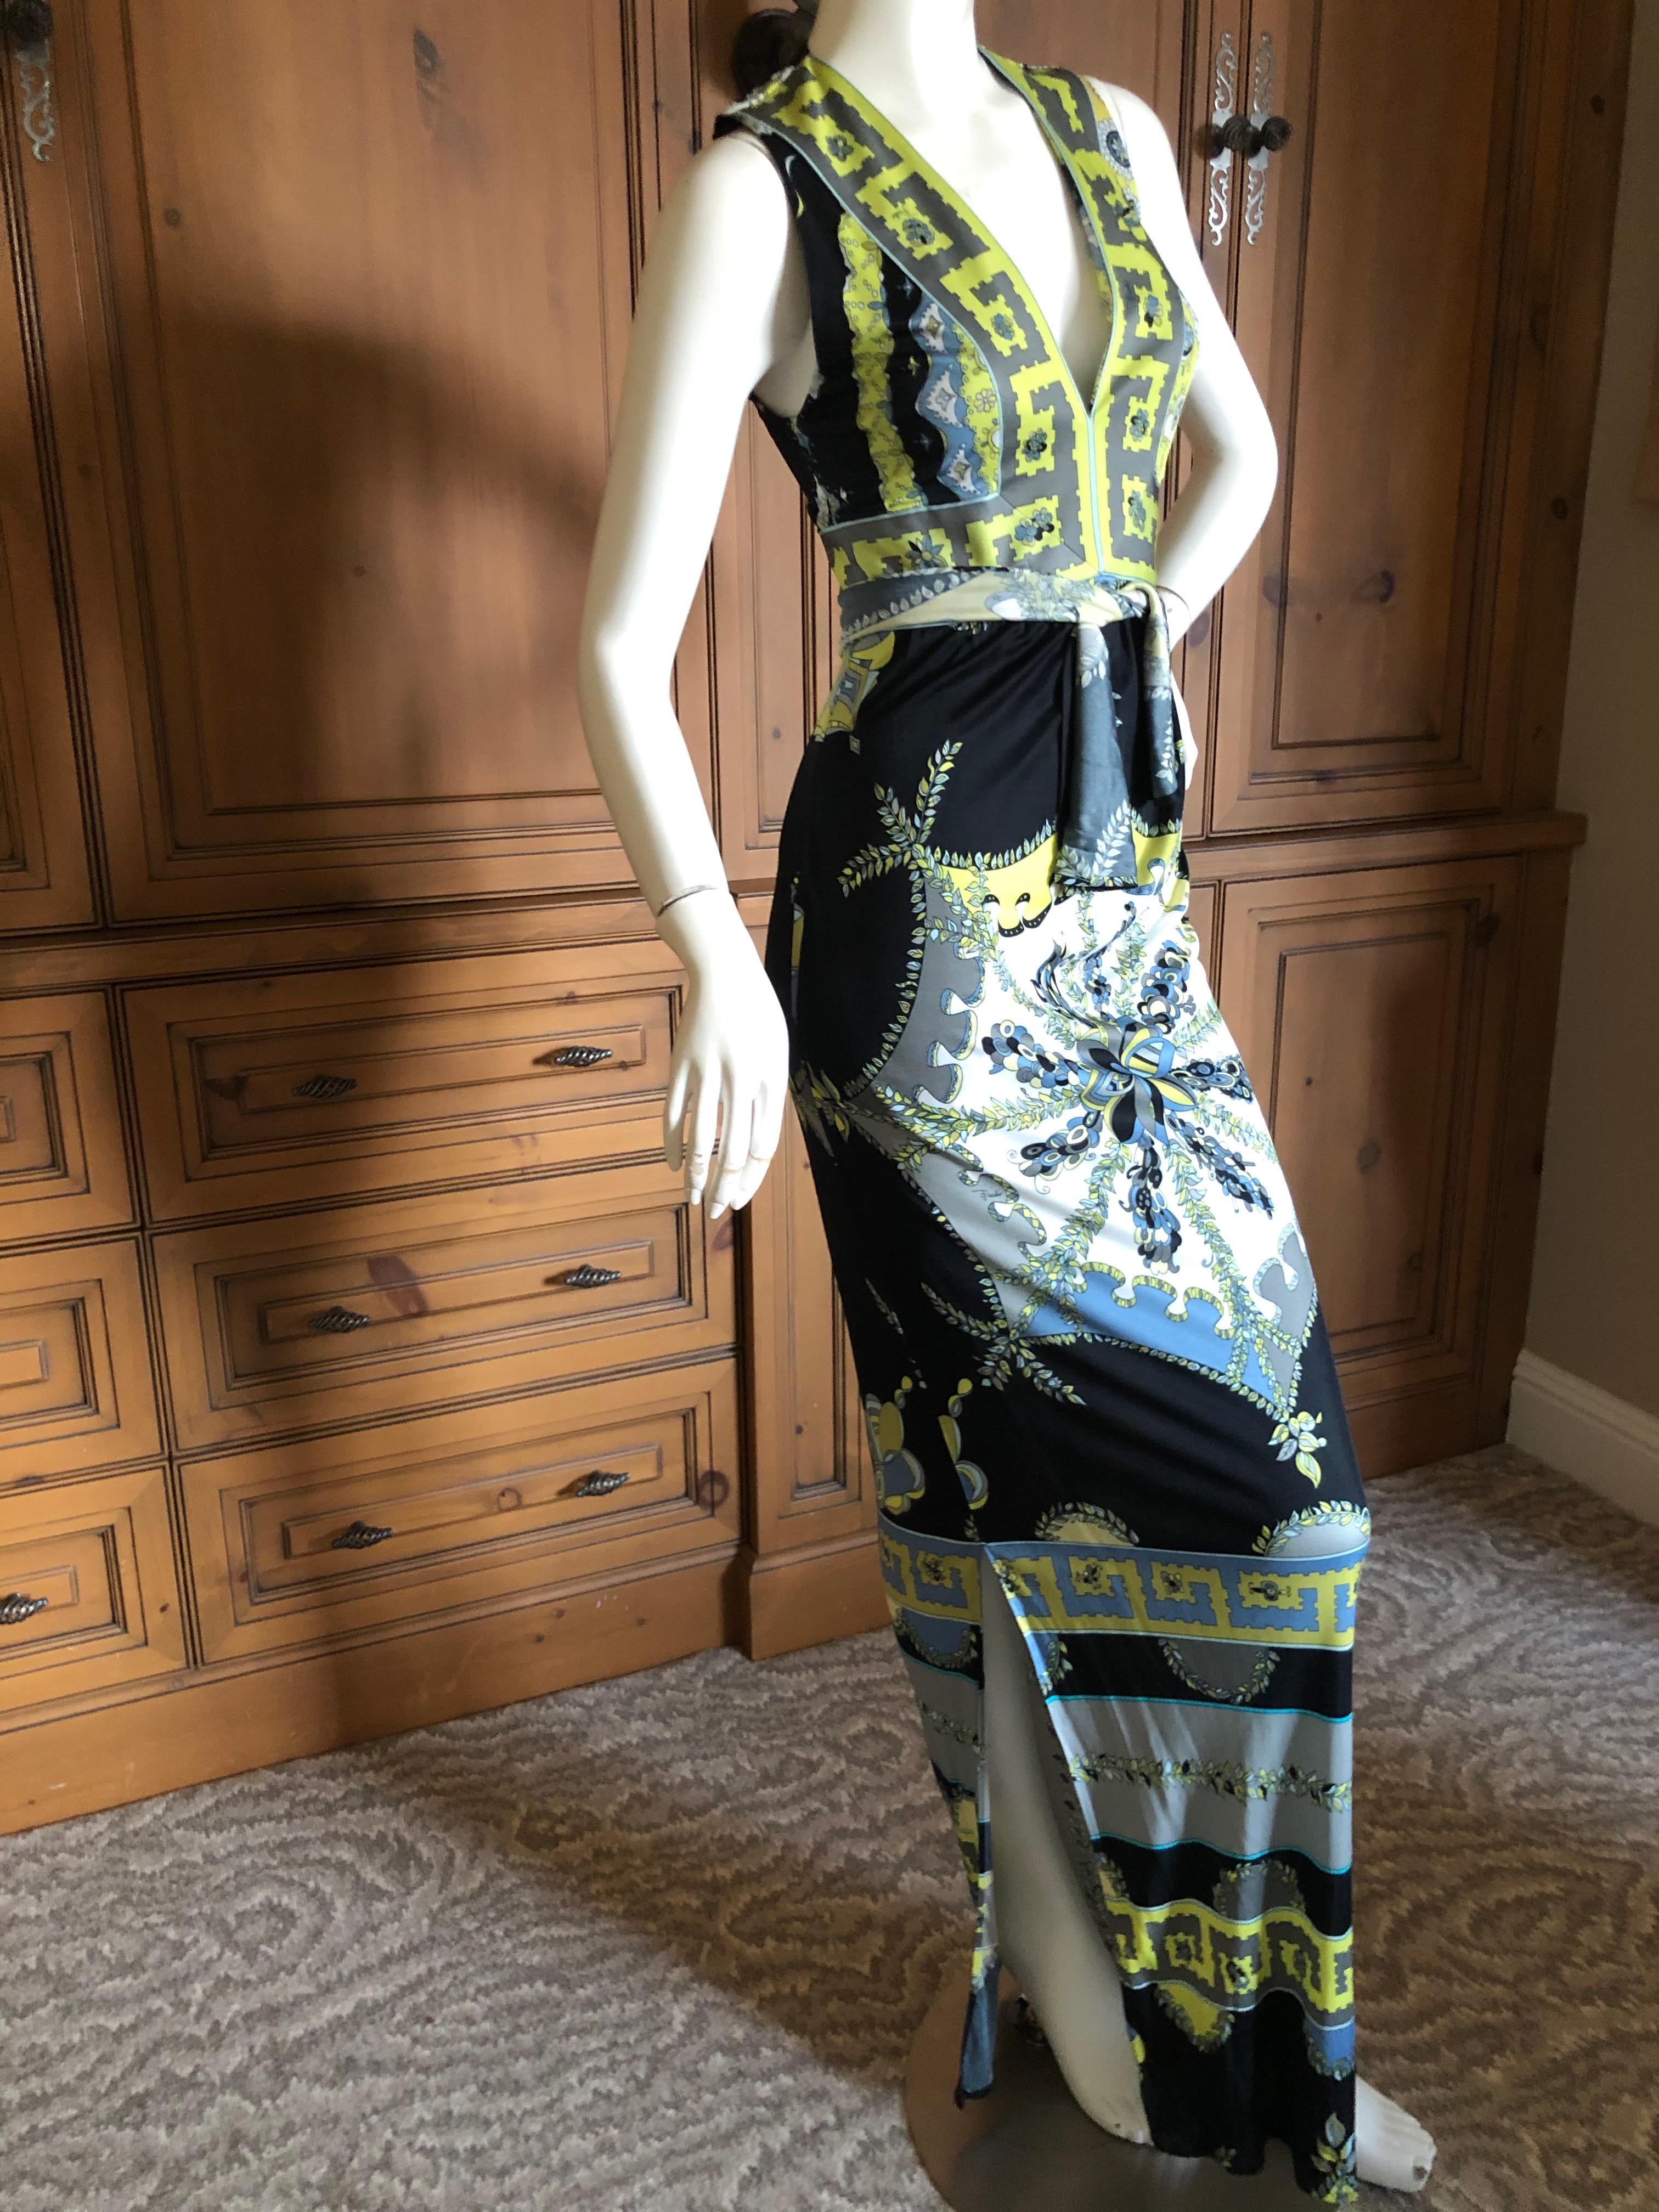 Emilio Pucci Plunging Maxi Dress.
This is so much prettier in person, please use the zoom feature to see details.
There are pockets.
Size 6  40 IT
Bust 35